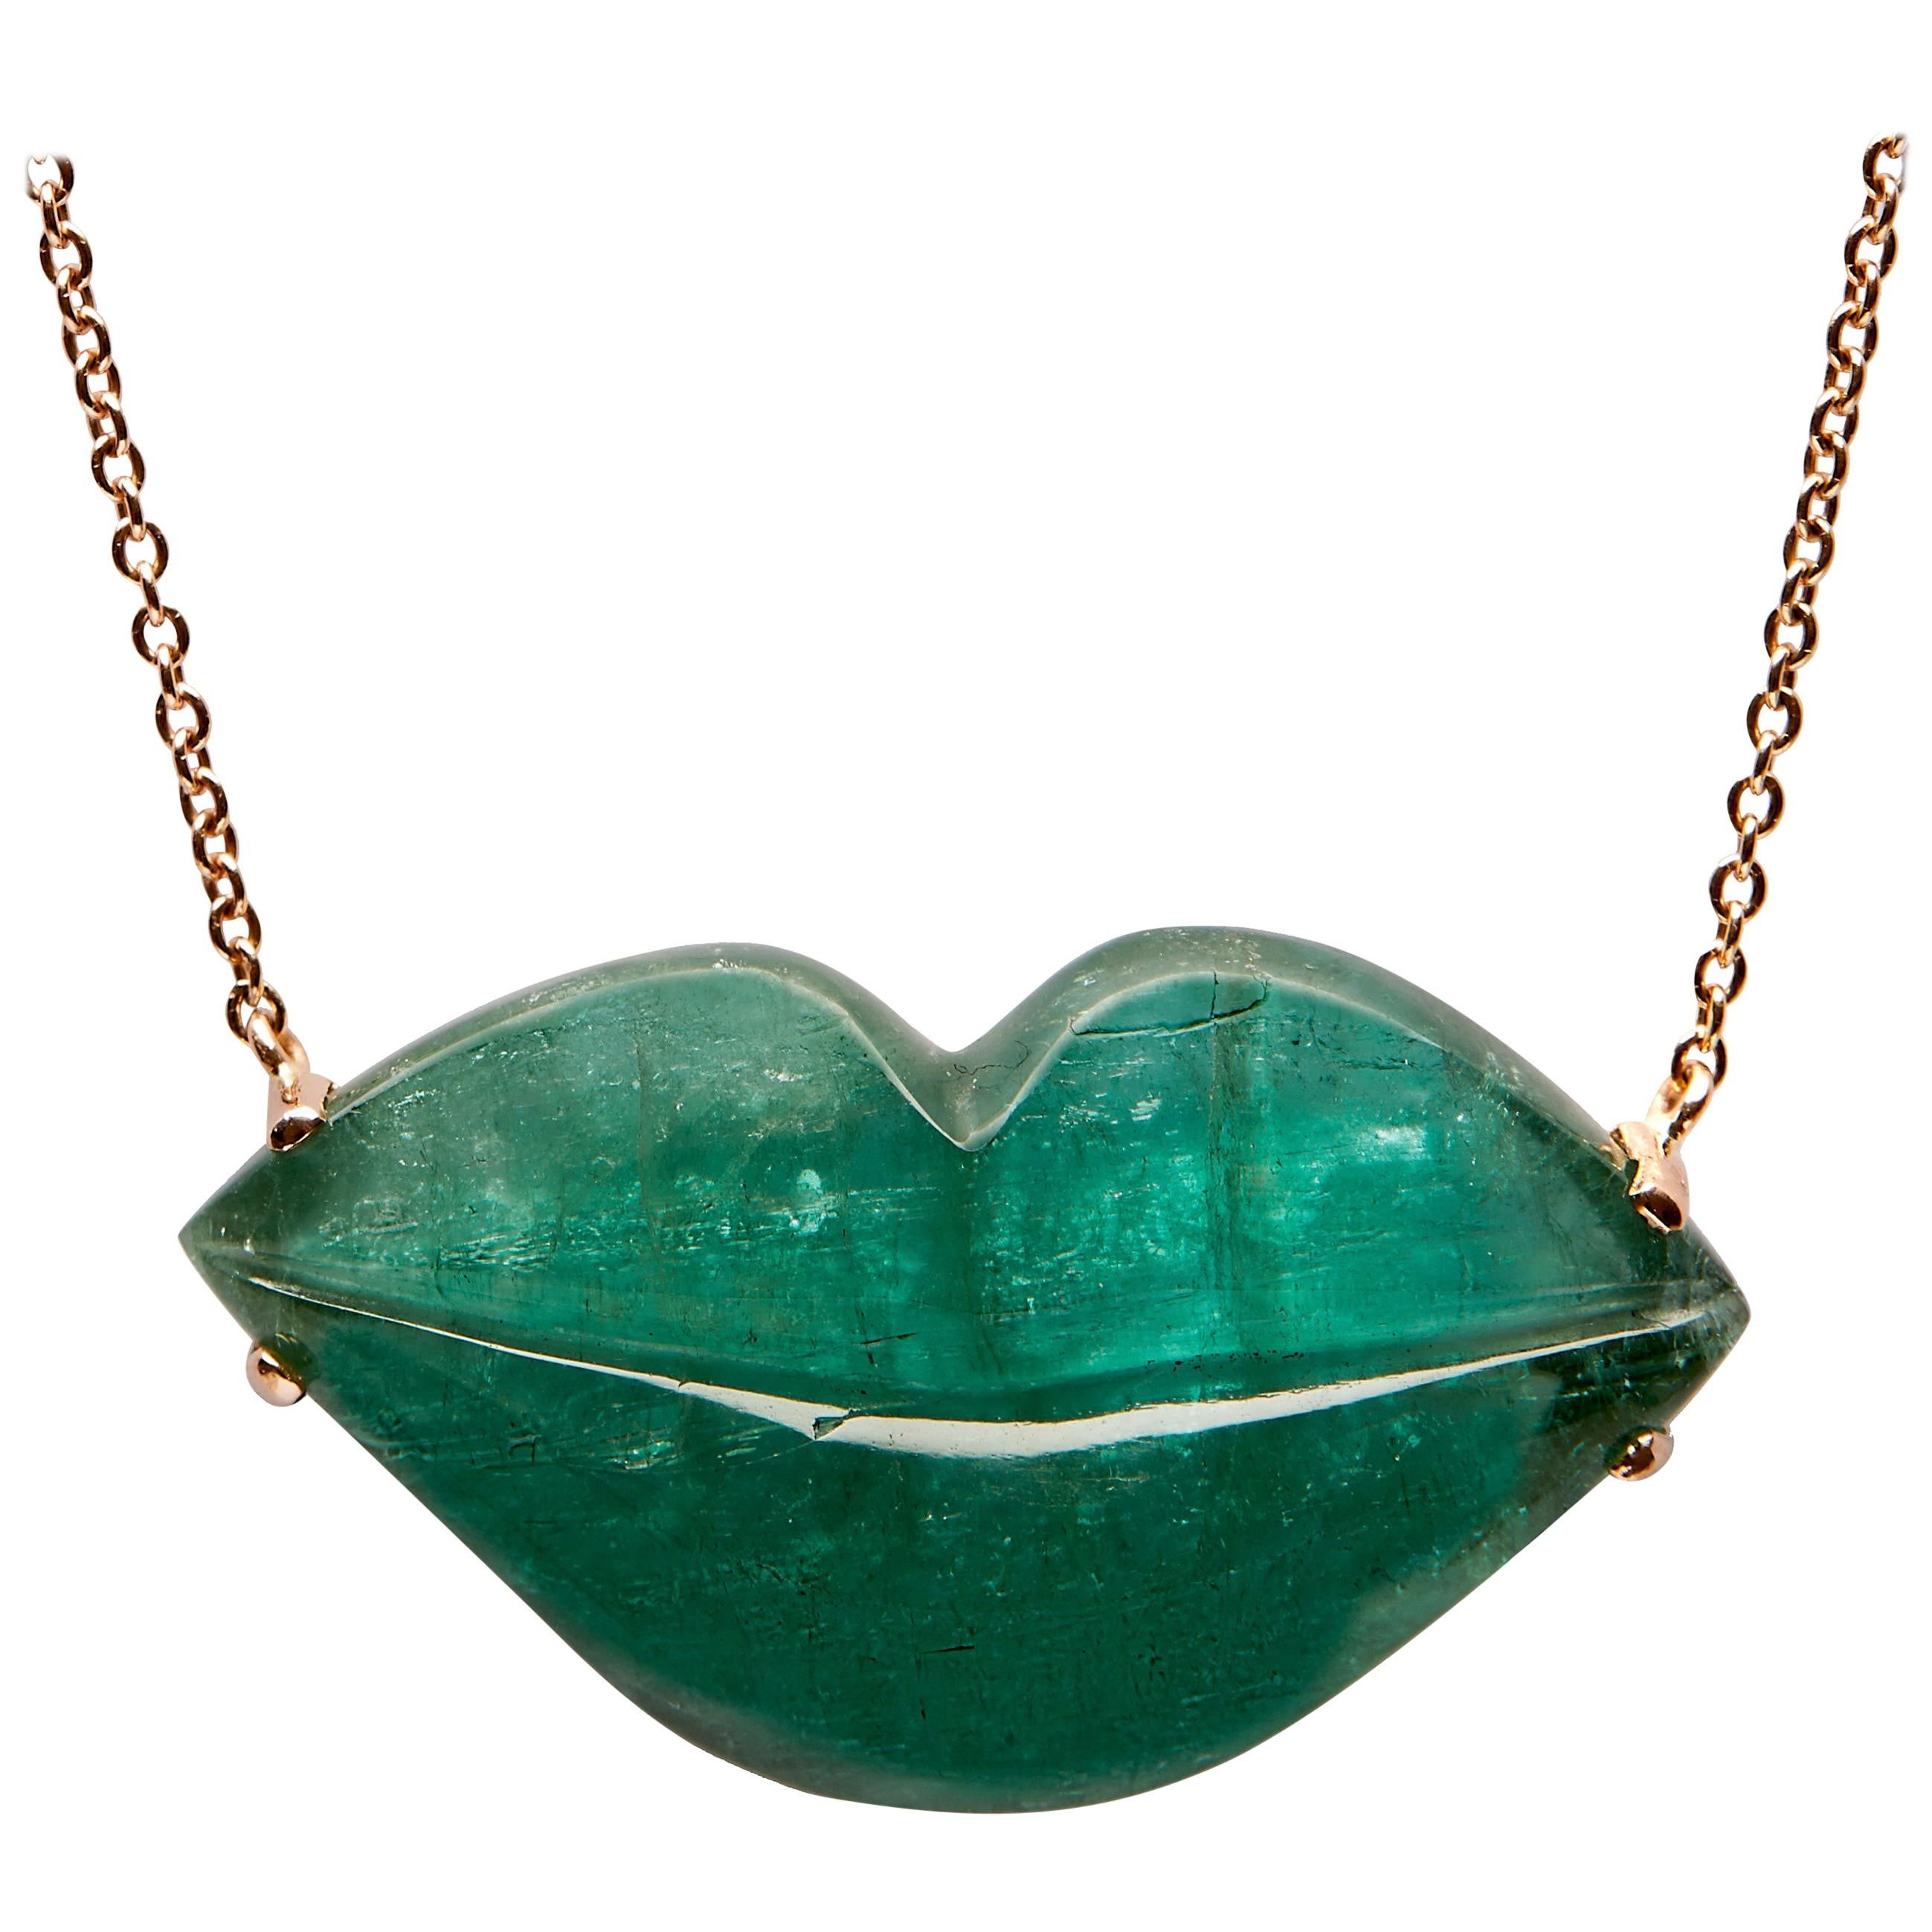 One of a Kind 34.5 Carat Green Tourmaline Lips Necklace 18 Karat Gold For Sale